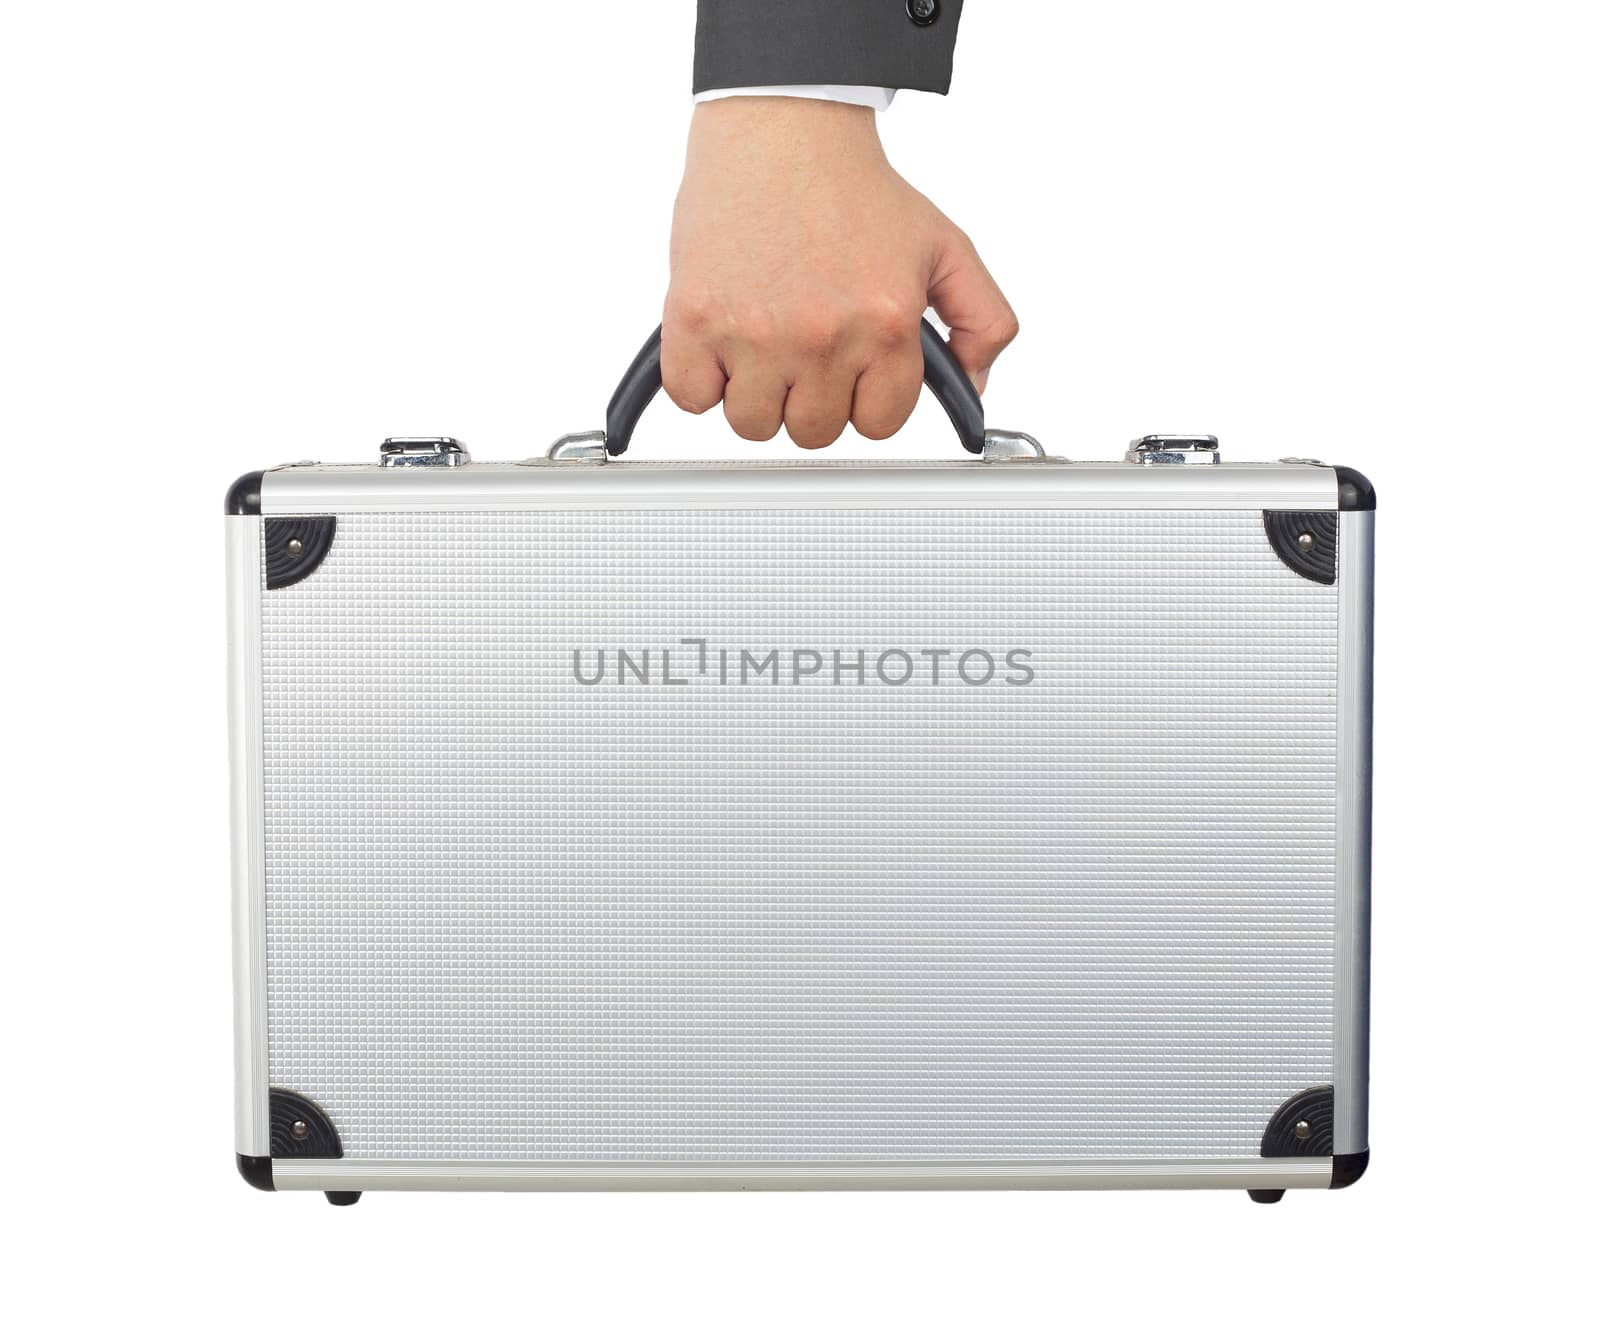 Hand and arm holding silver luggage or brief case isolated on wh by jayzynism